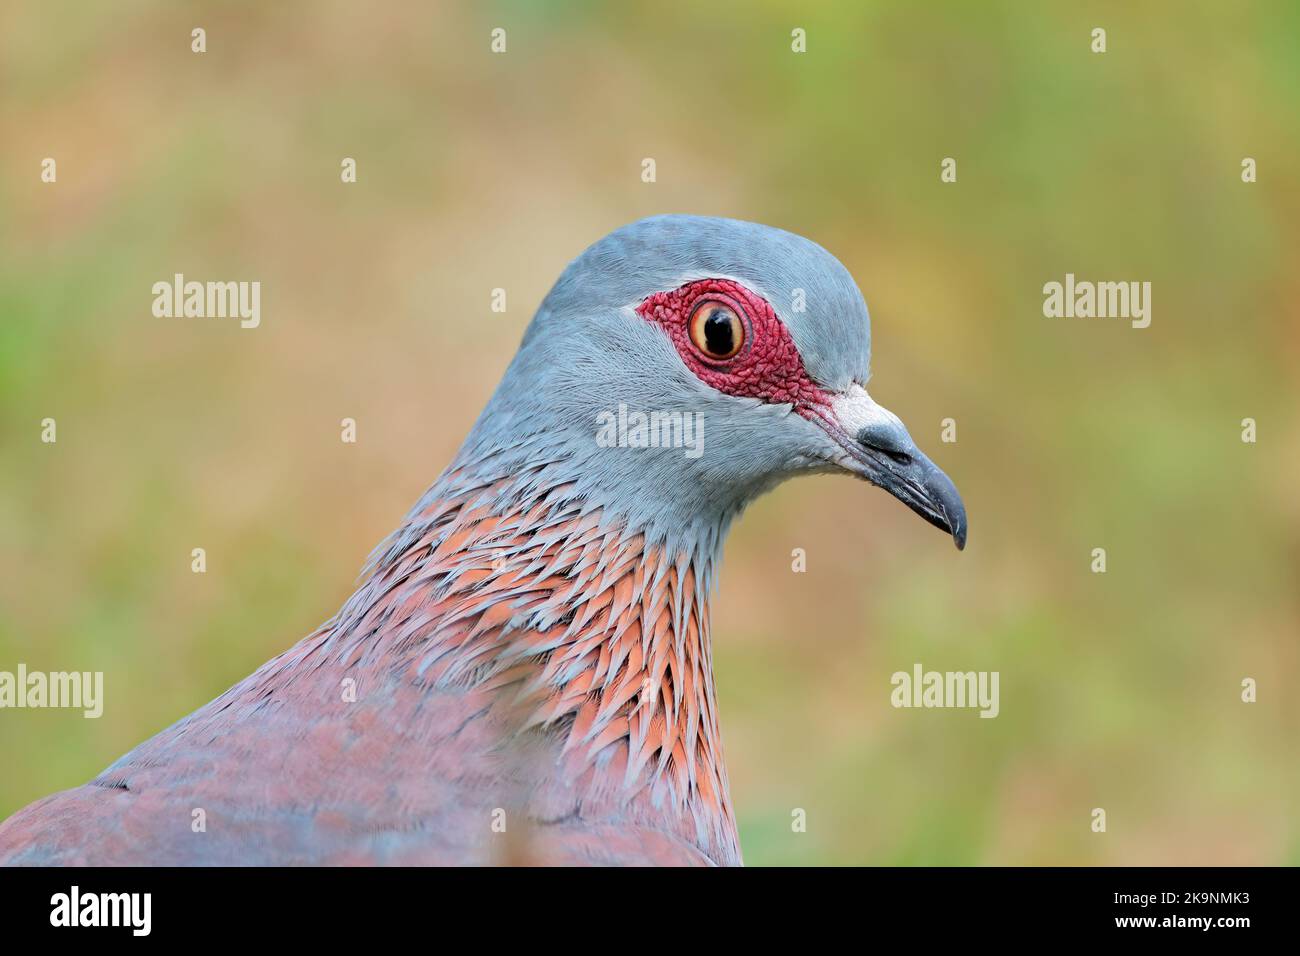 Close-up portrait of a rock pigeon (Columba guinea), South Africa Stock Photo